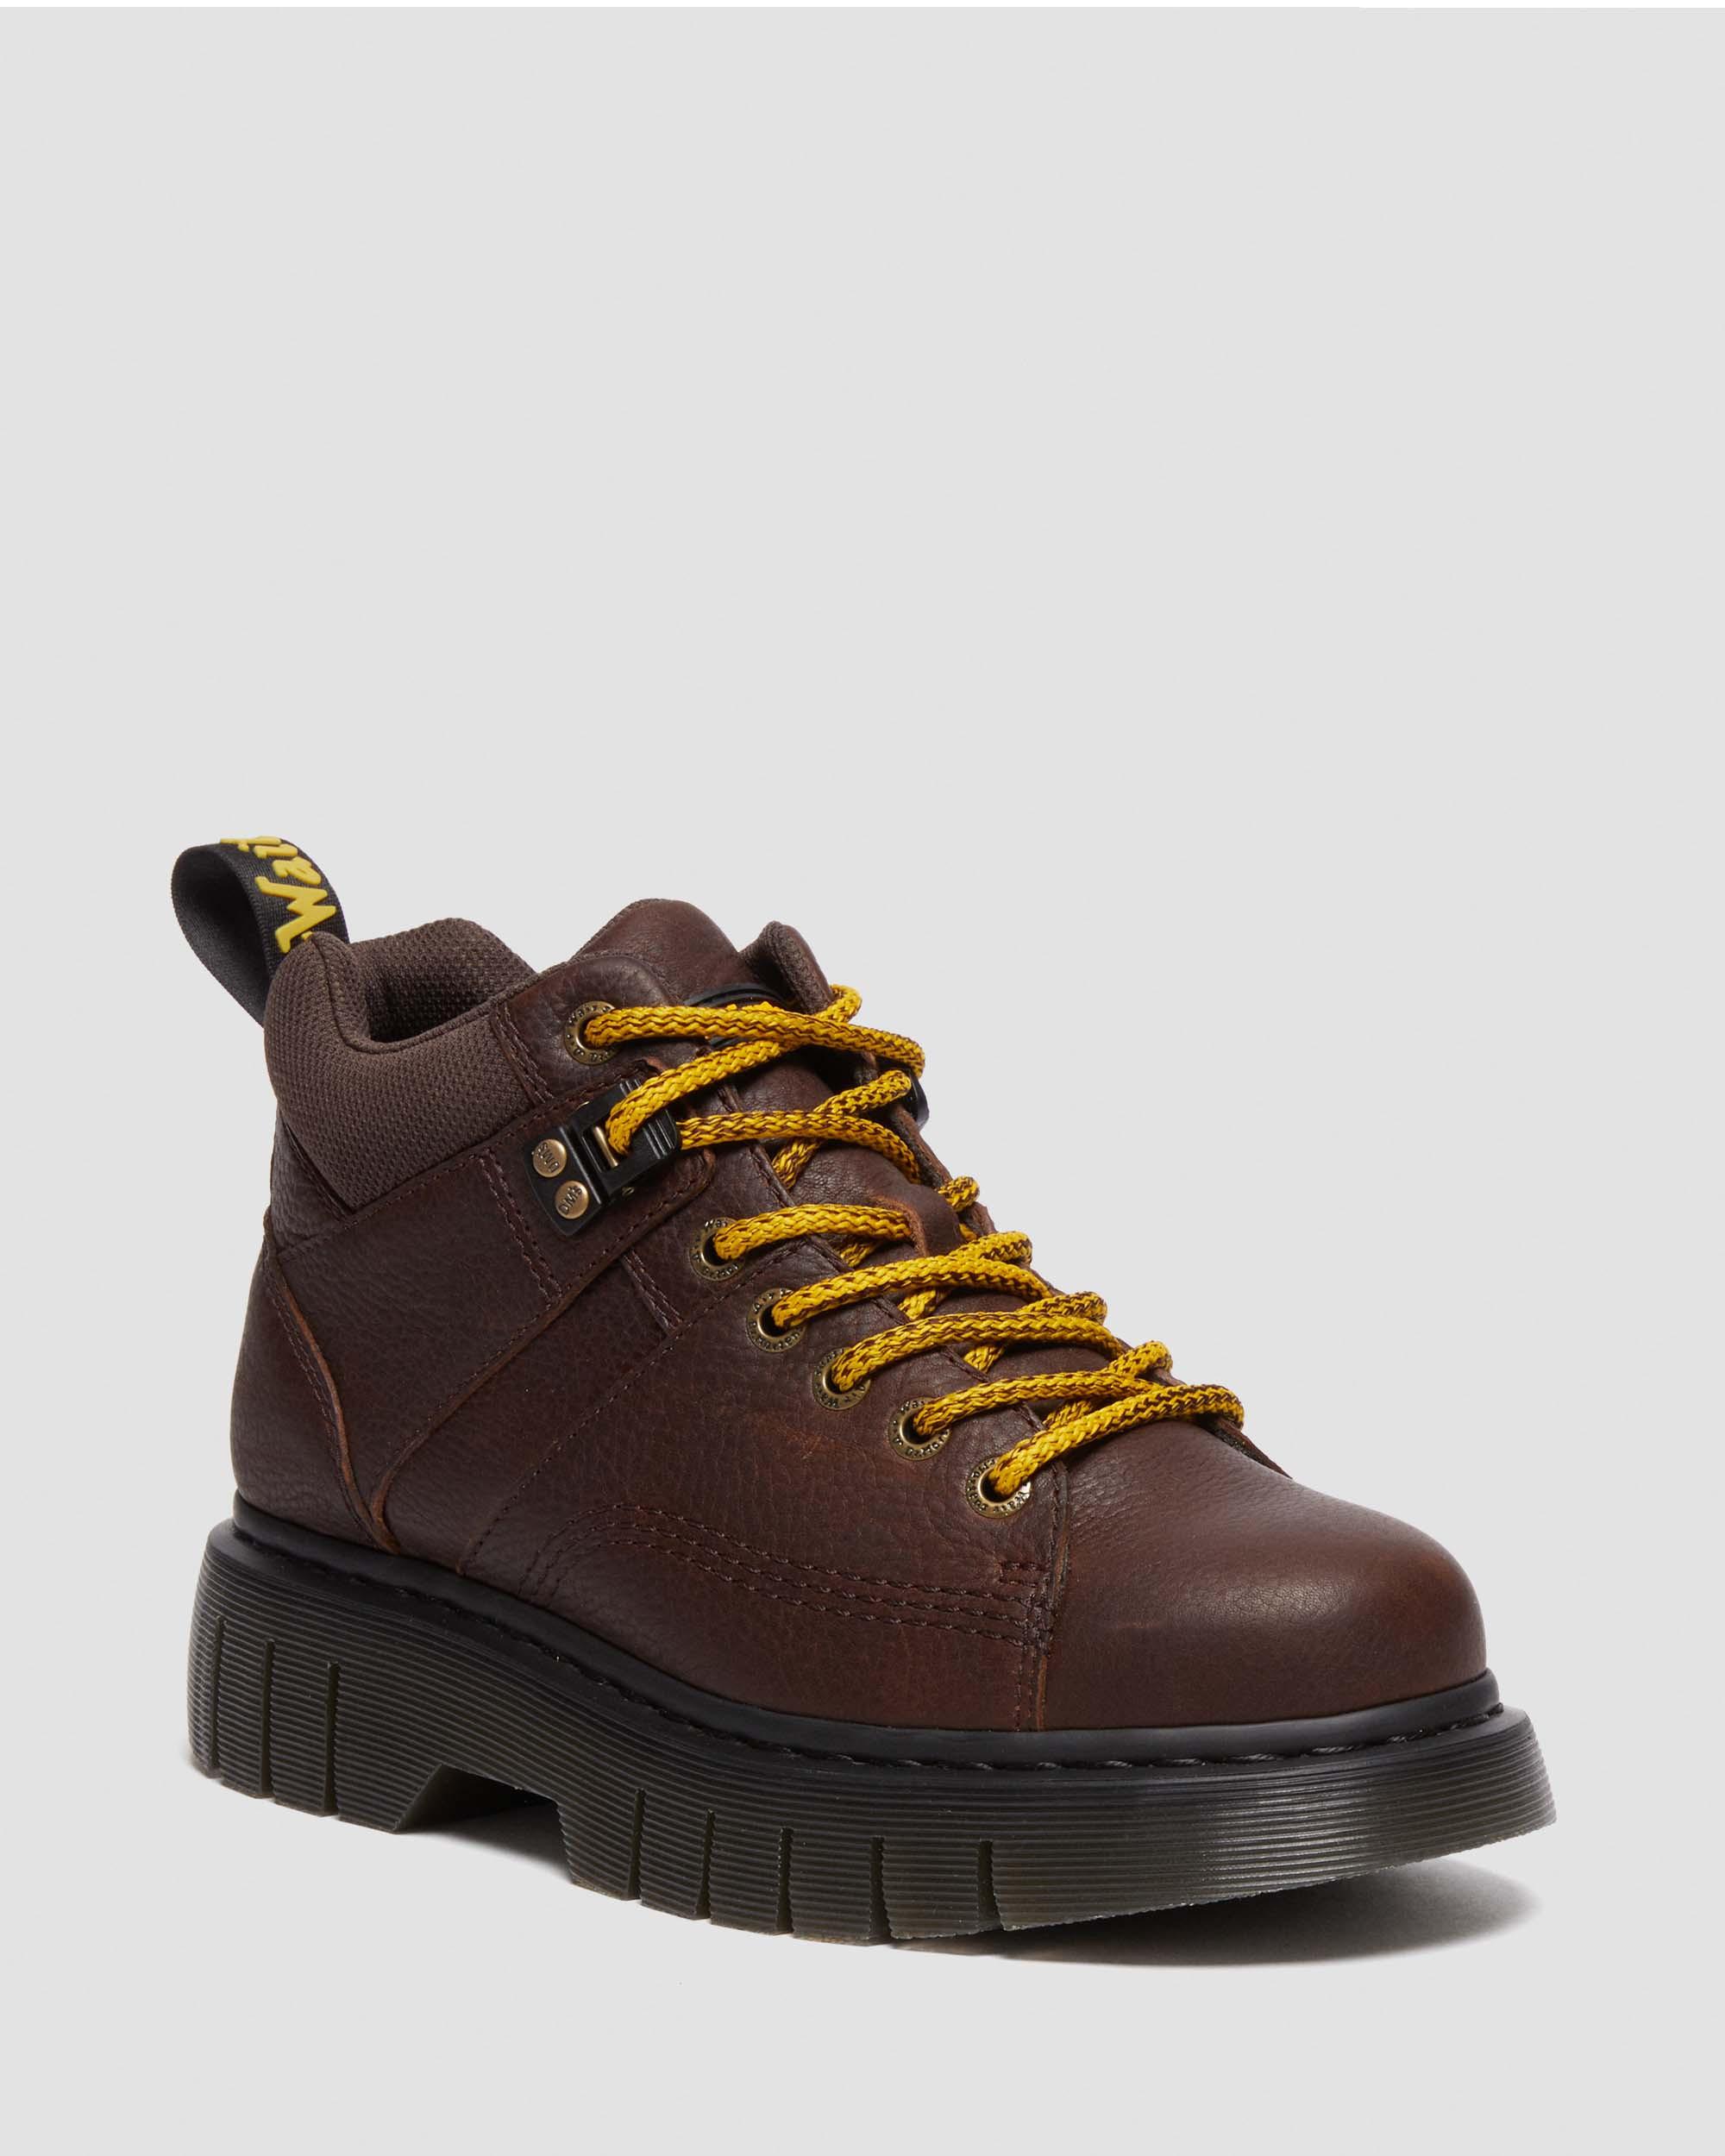 DR MARTENS Woodard Grizzly Leather Low Casual Boots